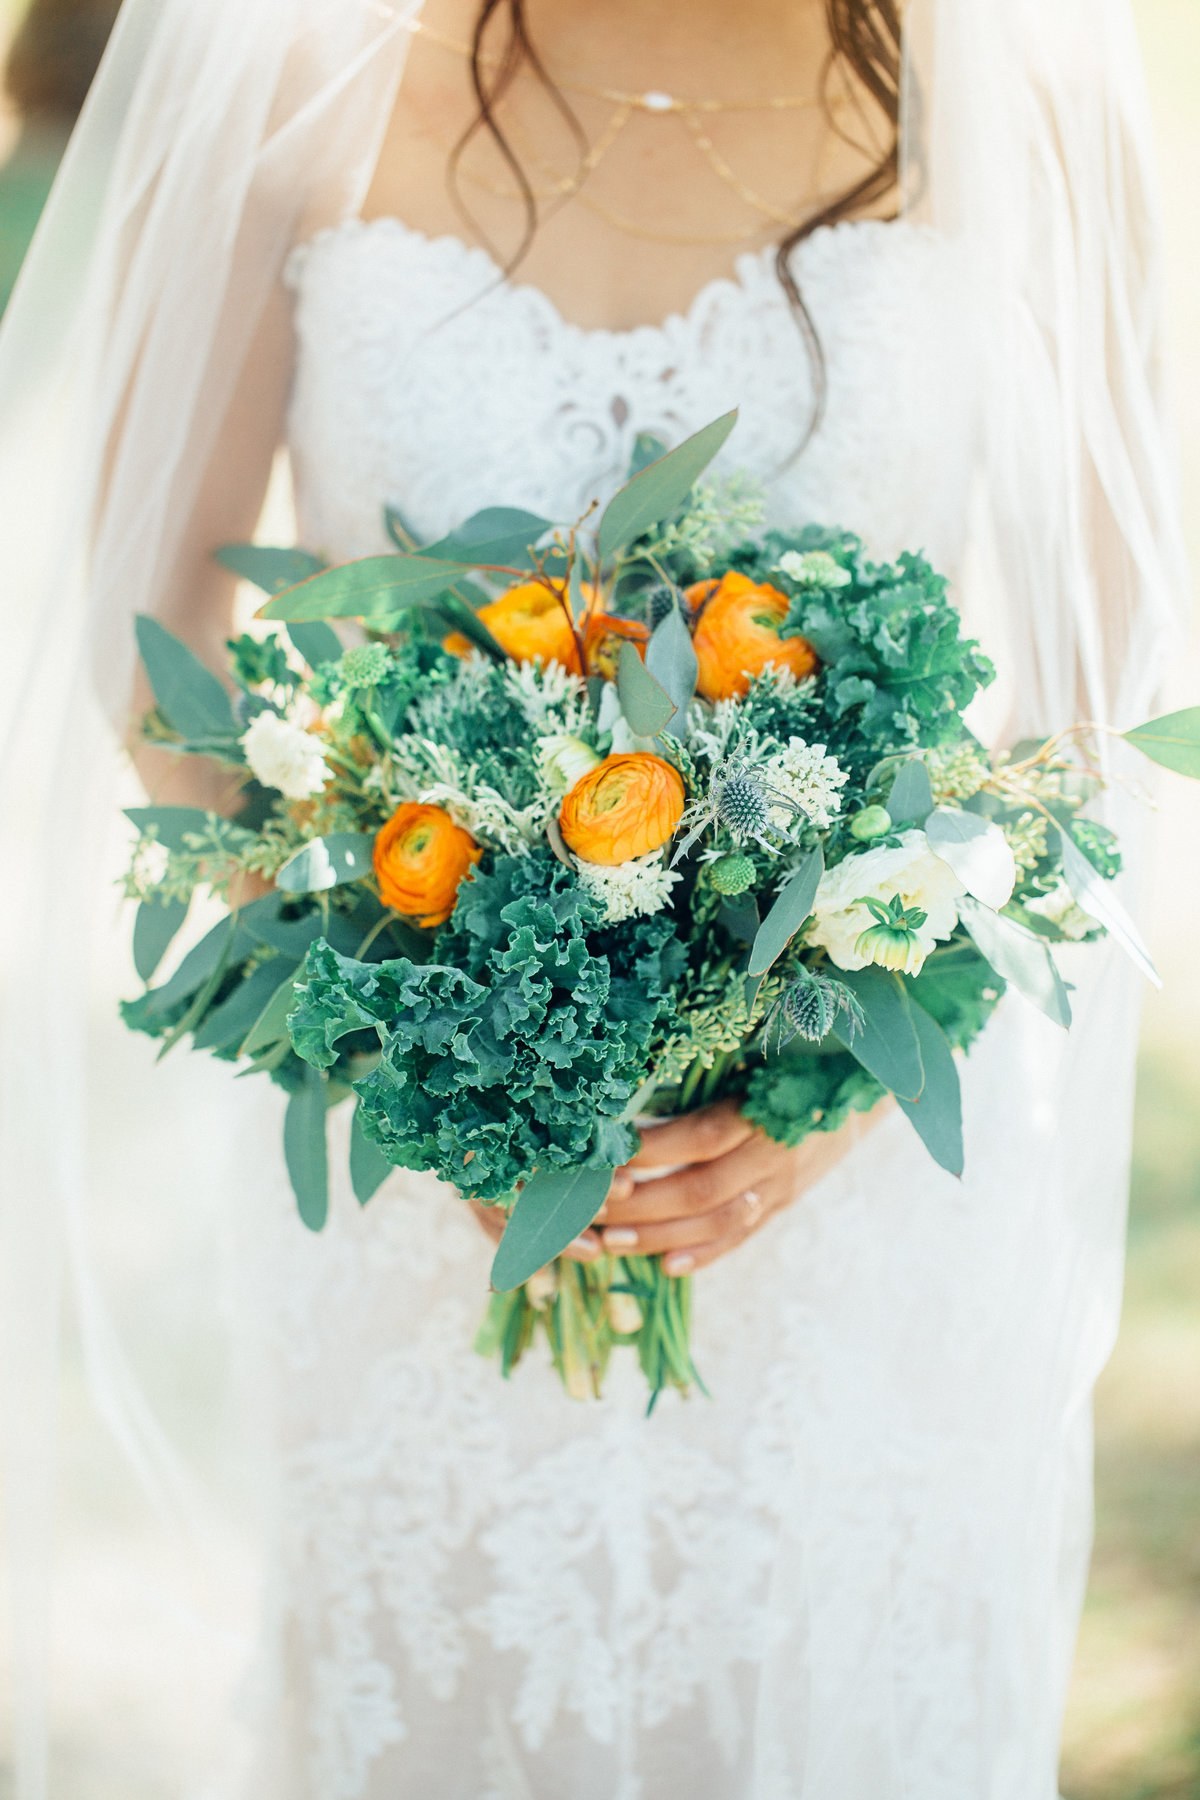 Wedding Photograph Of Bride Showing a Bouquet Of Flowers Los Angeles